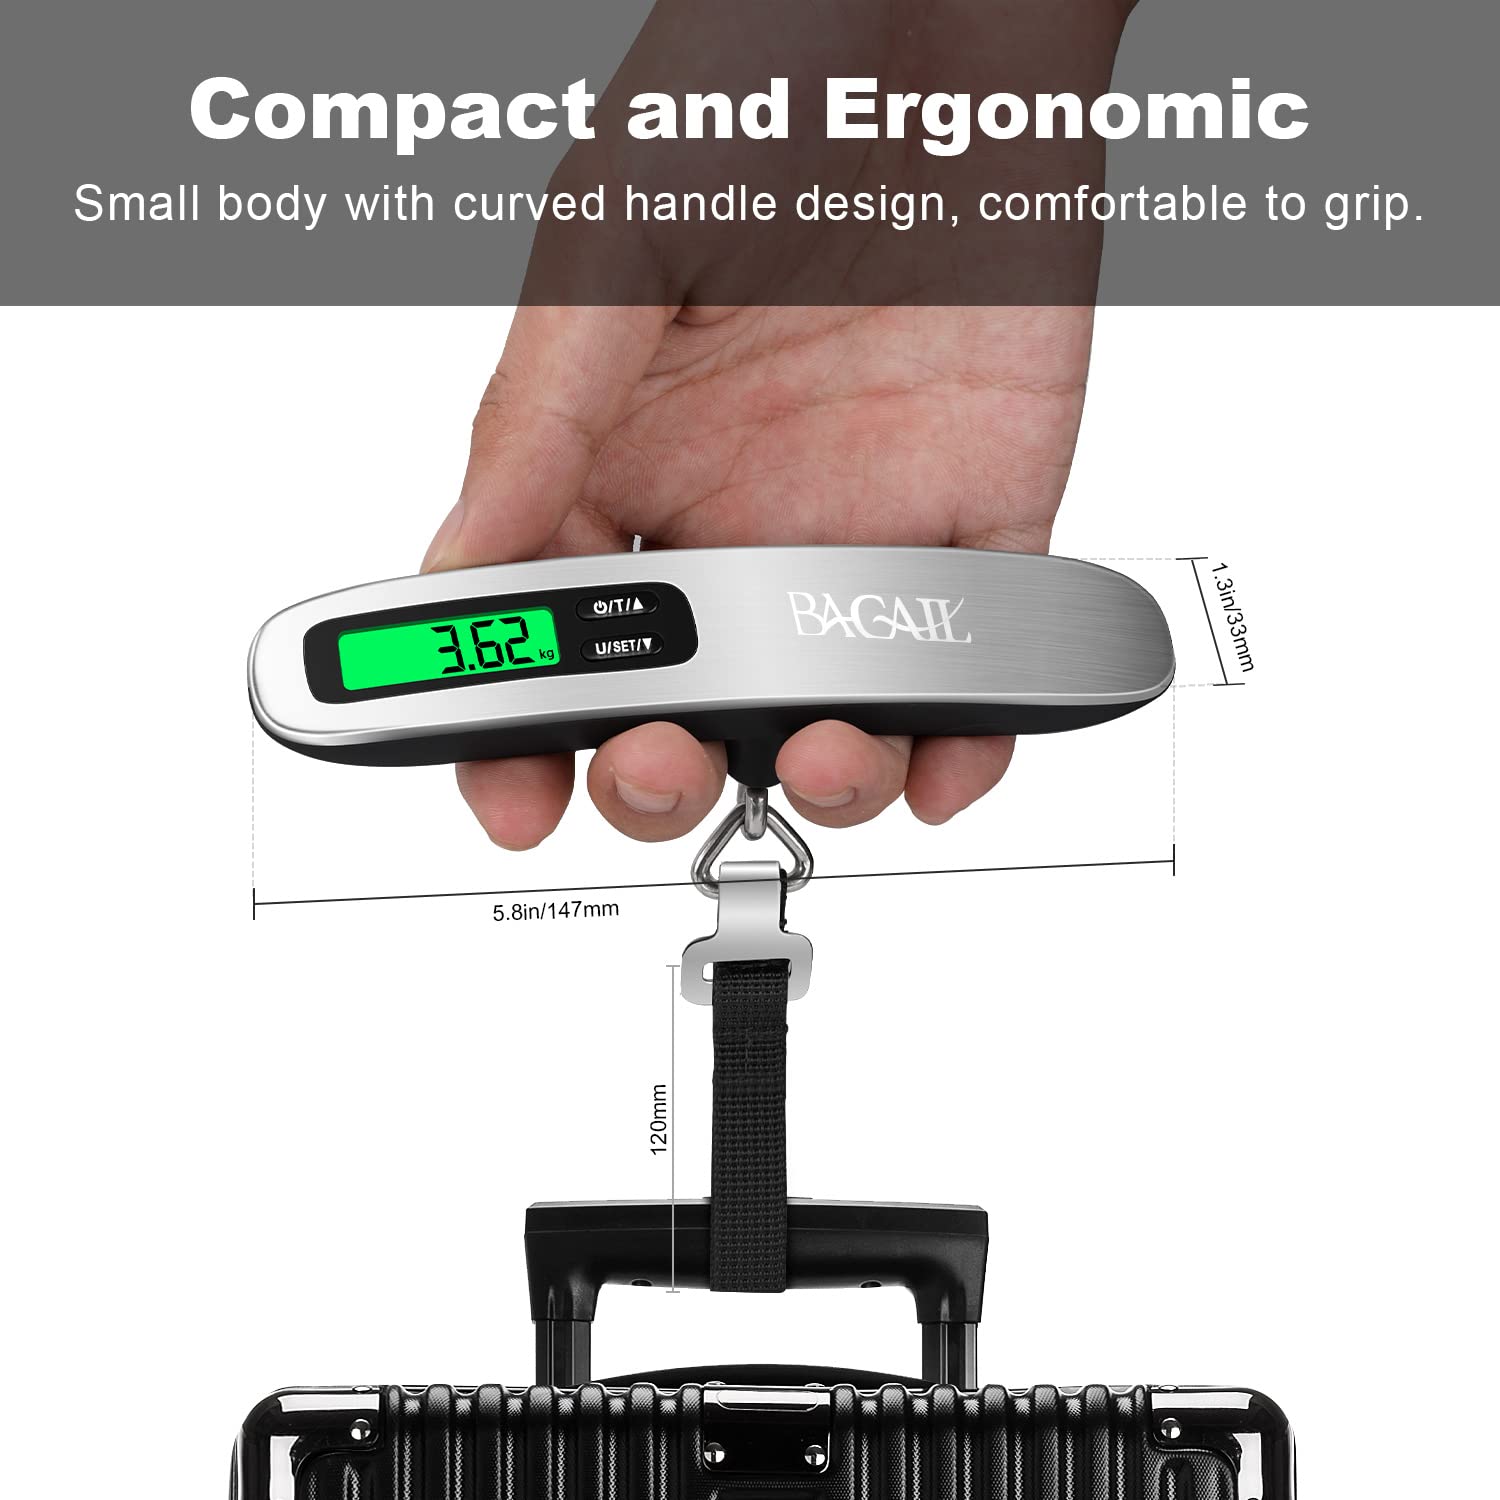 Digital Luggage Scale Electronic Portable Suitcase Travel Weighs